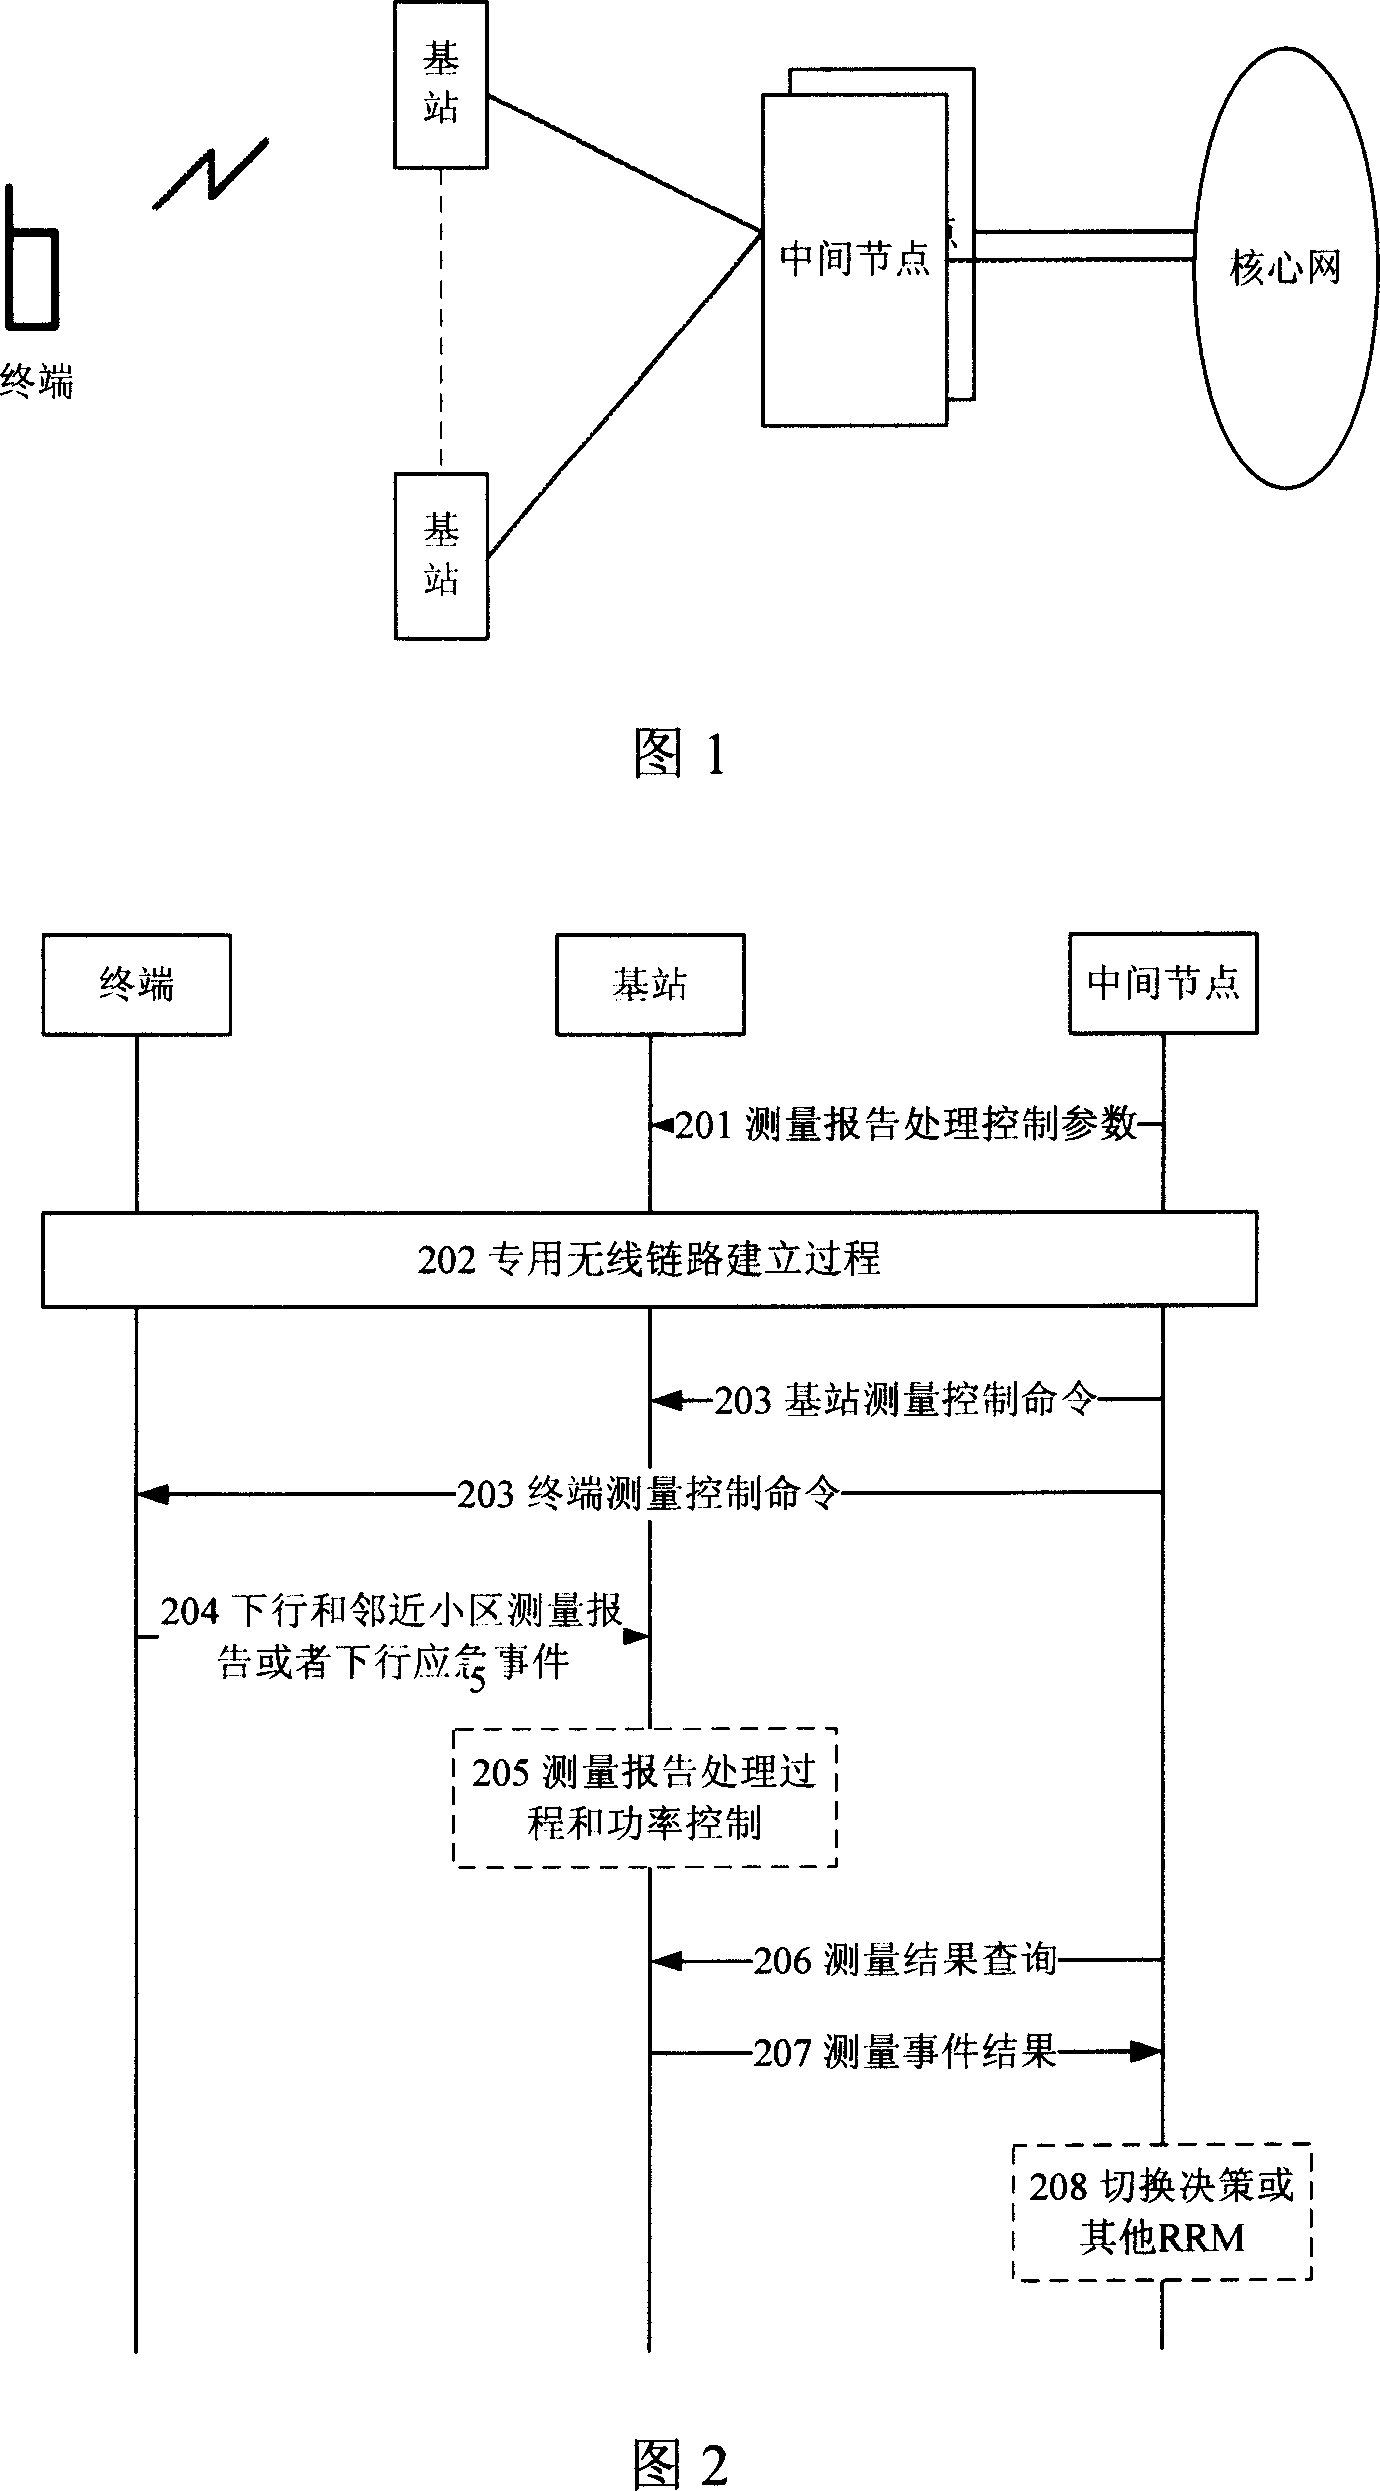 Cellular mobile communication system and special processing method for measurement report for same